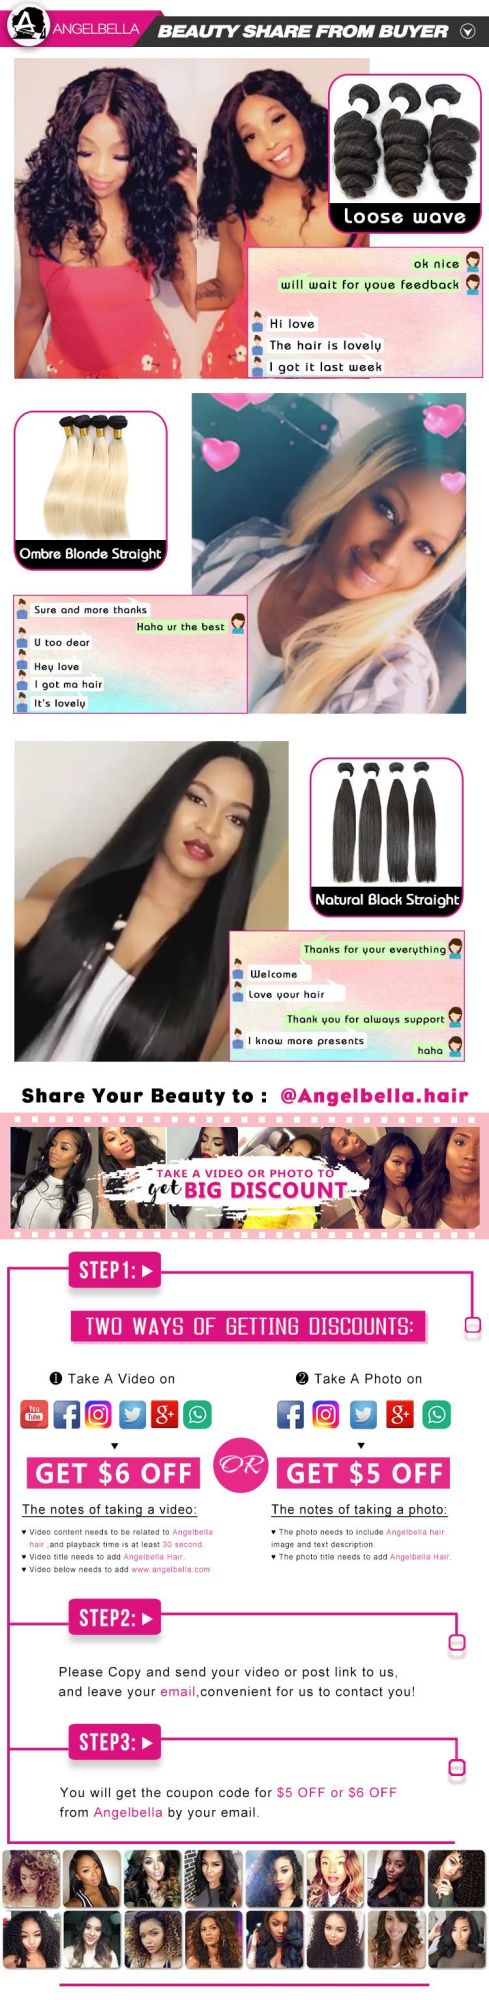 Angelbella Wholesales Price Remy Human Hair Wigs 613# Lace Wig for Girl